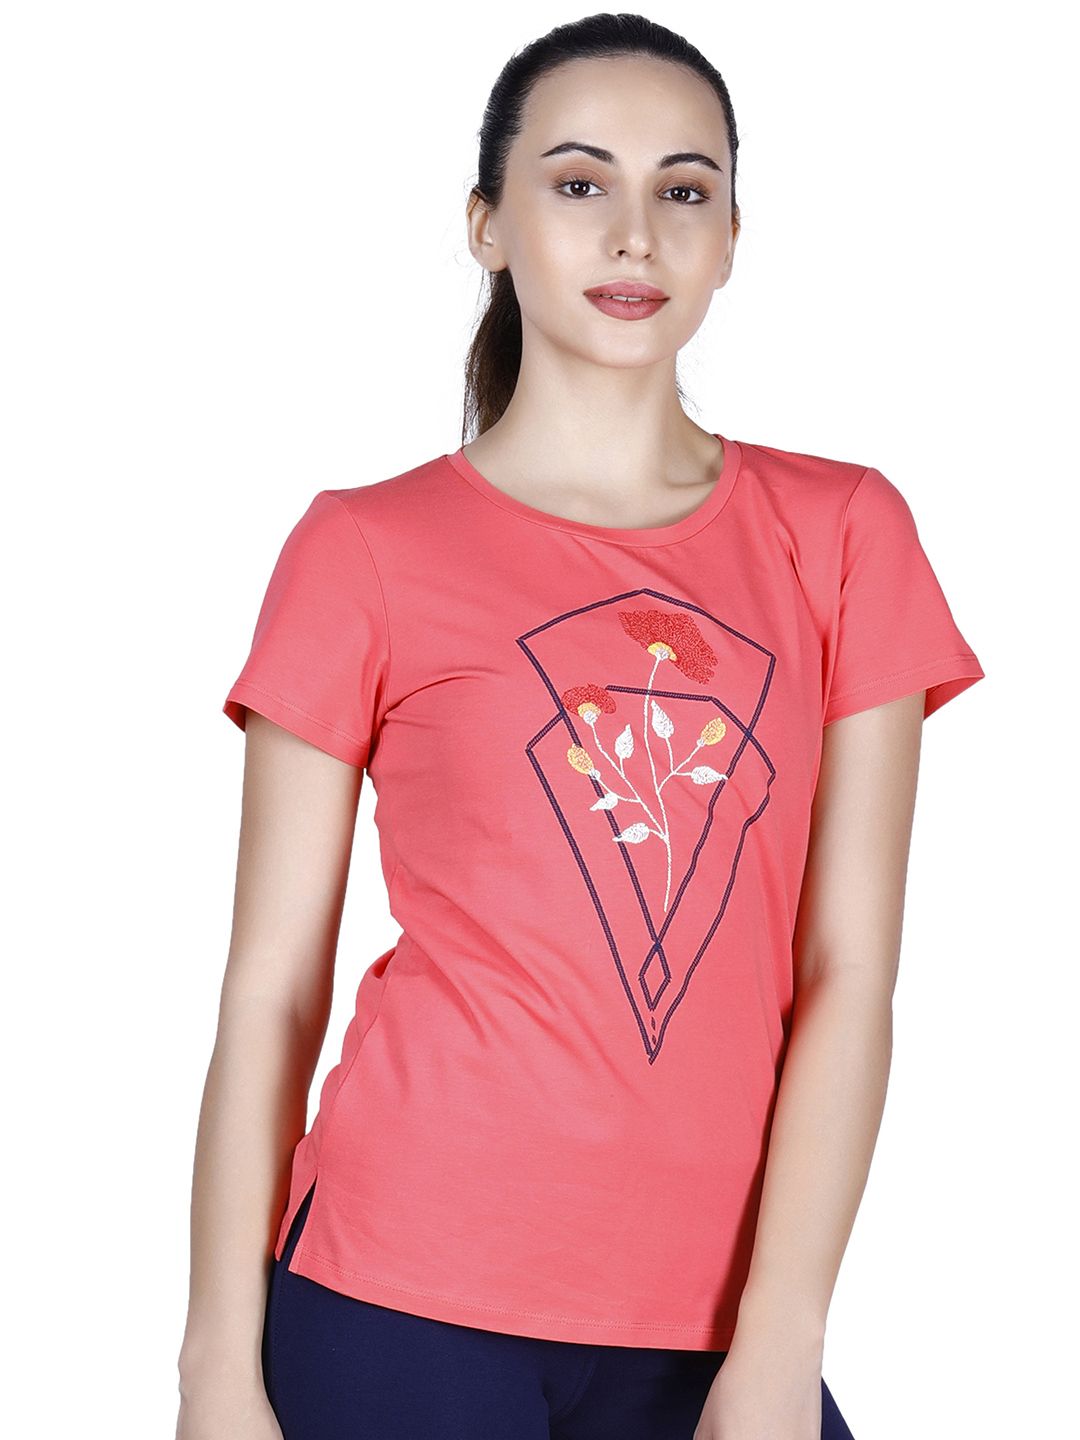 LAASA SPORTS Women Red & Blue Printed Cotton Training or Gym T-shirt Price in India